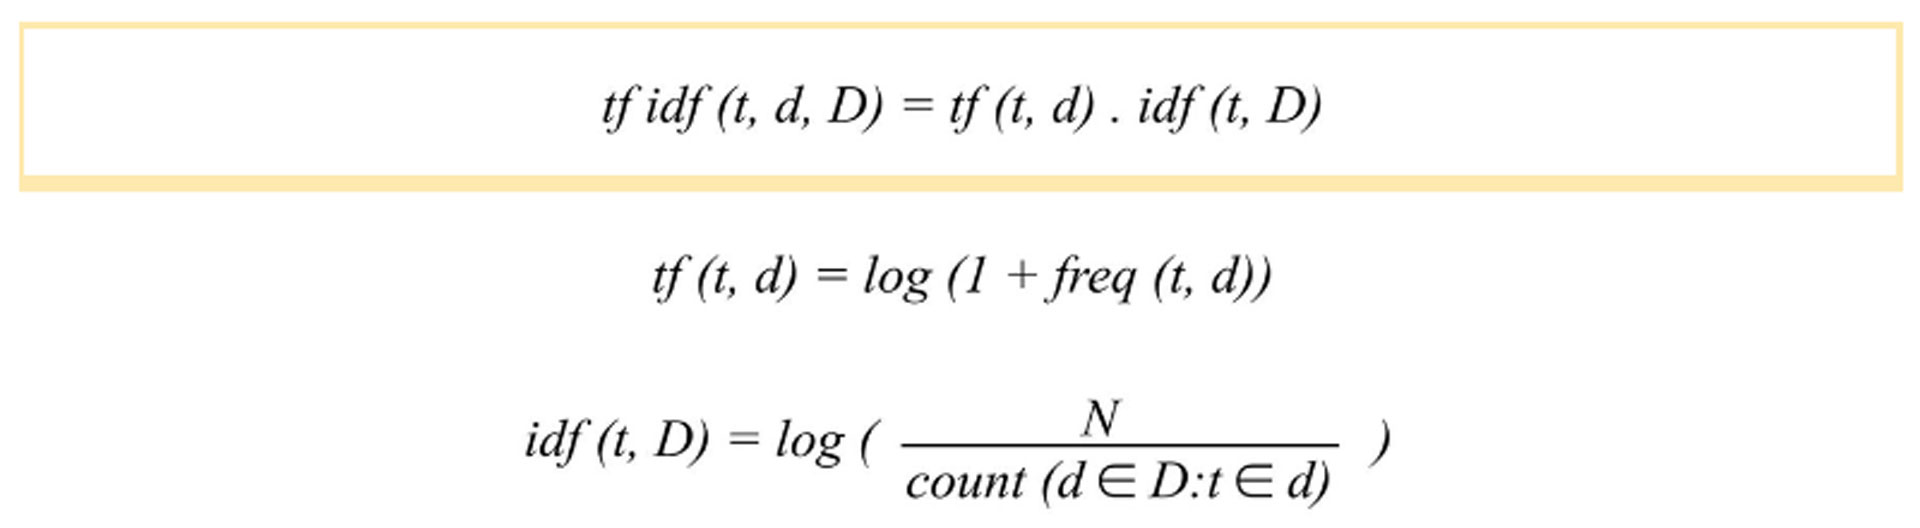 mathematical approach for TF-IDF 